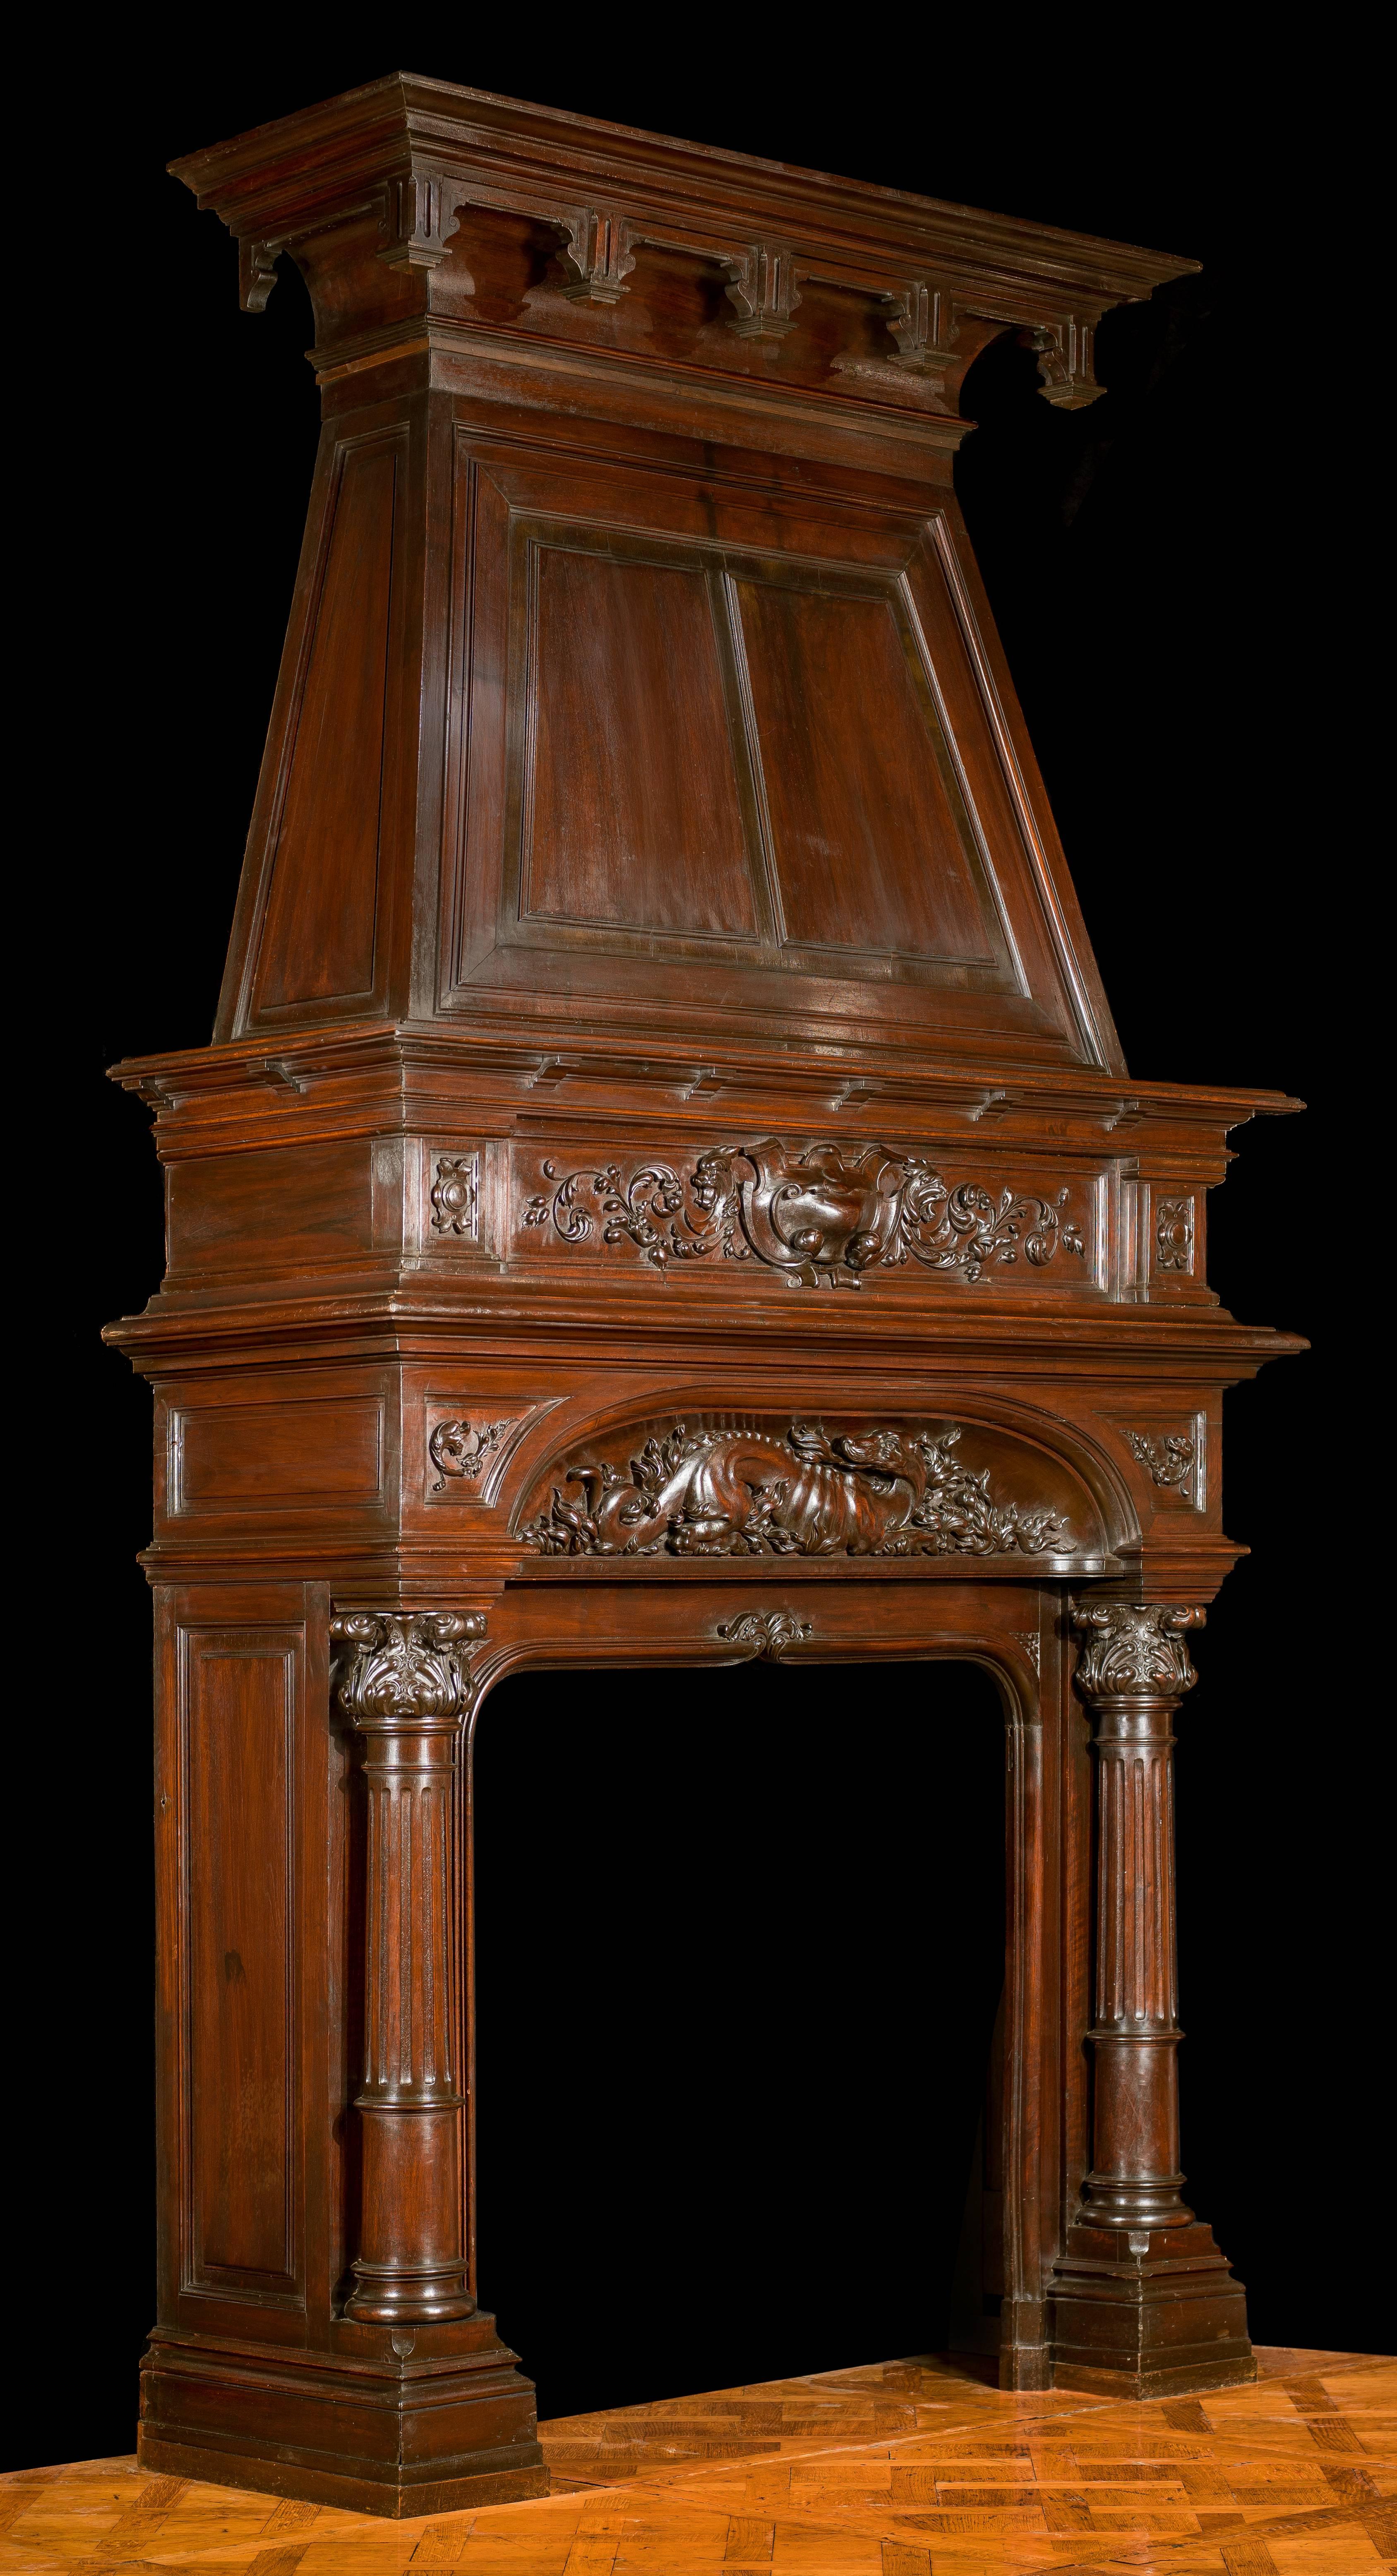 A tall and boldly carved, columned walnut trumeau fireplace in the Renaissance style. The upper frieze, with a central cartouche flanked by floral scrolls, is set above the main frieze upon which is carved, in high relief, a fire breathing